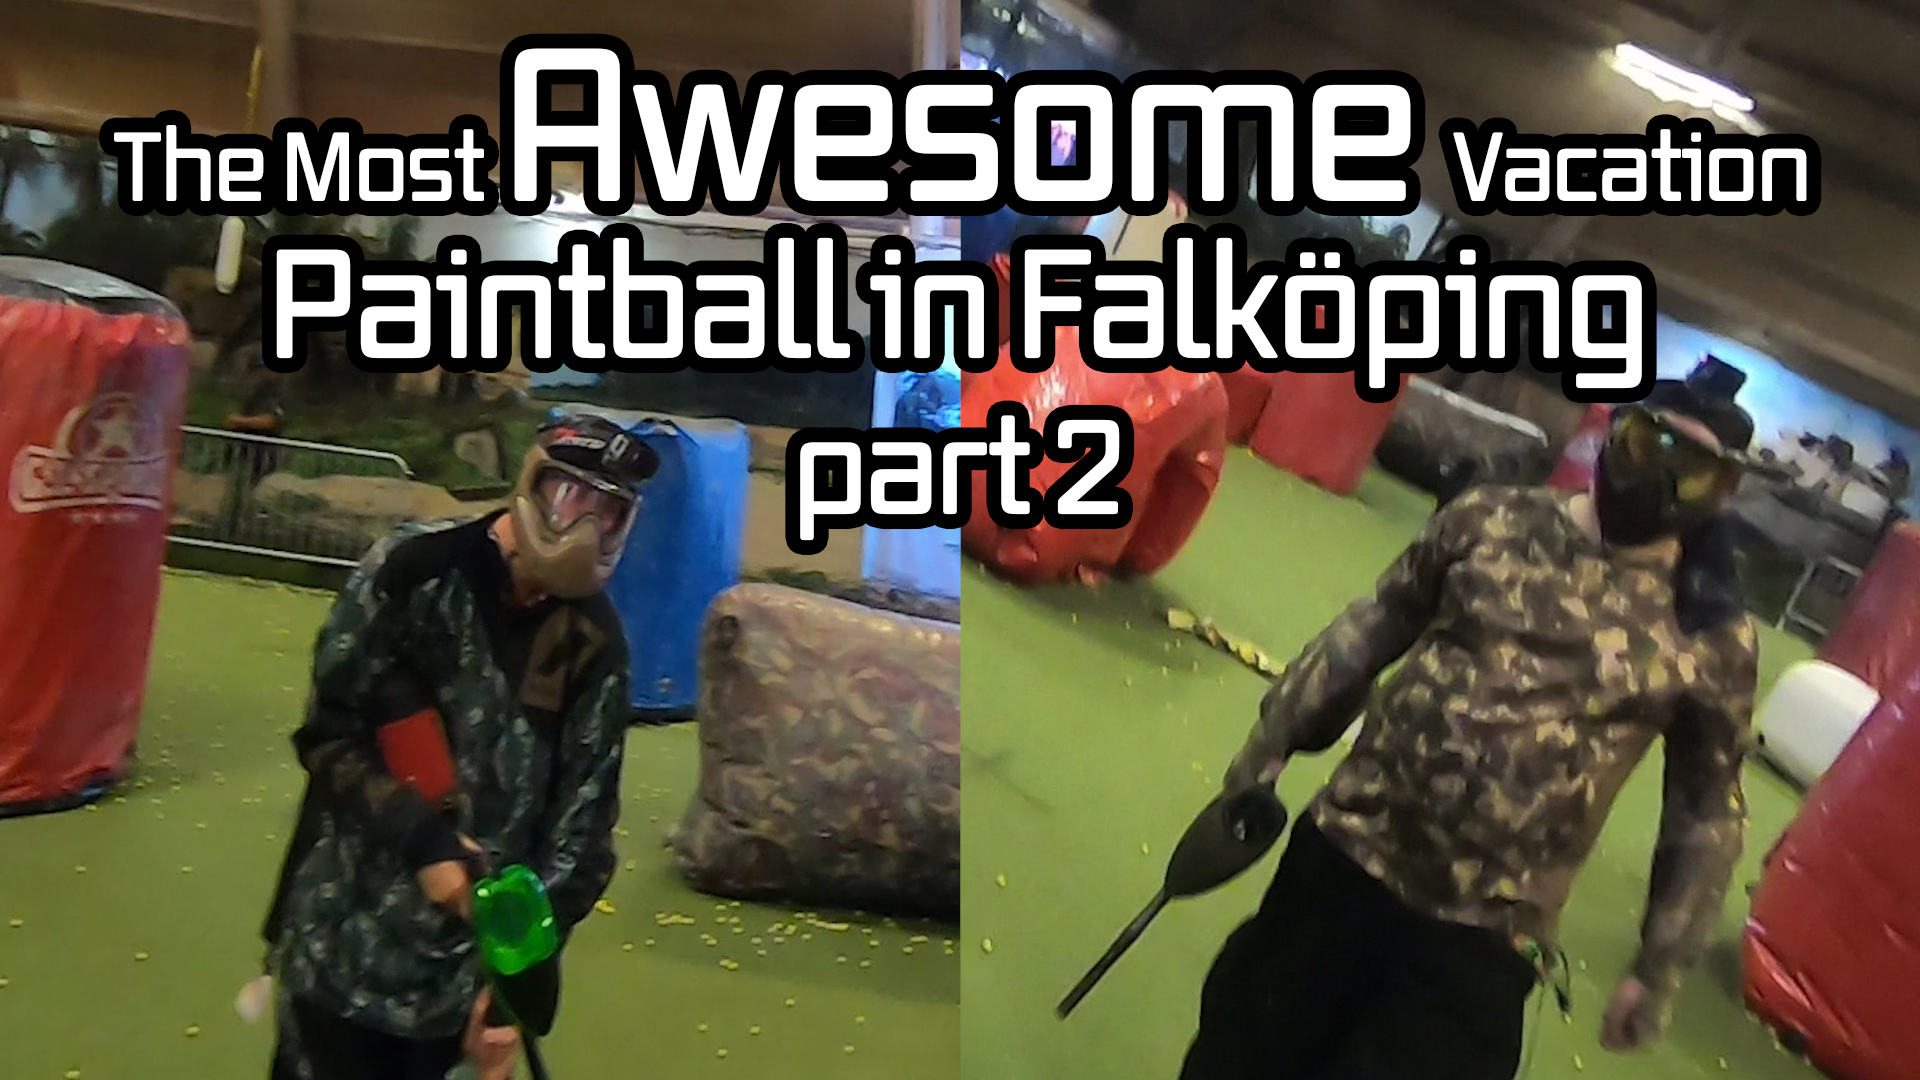 The Most Awesome Vacation: Paintball in Falköping - Part 2